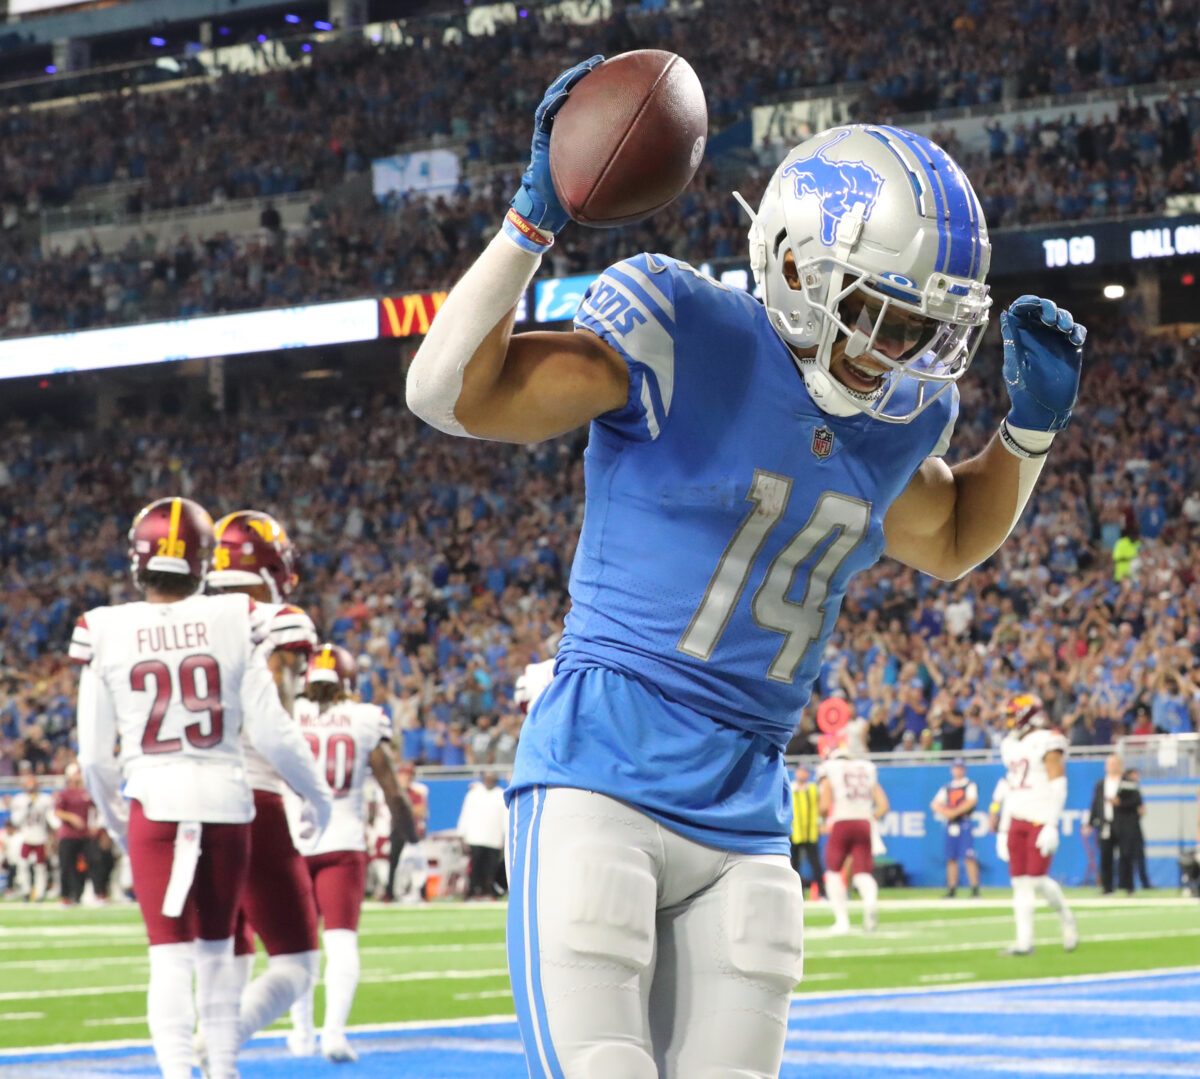 Commanders credit the Lions ‘great offensive play-calling’ in Detroit’s Week 2 win